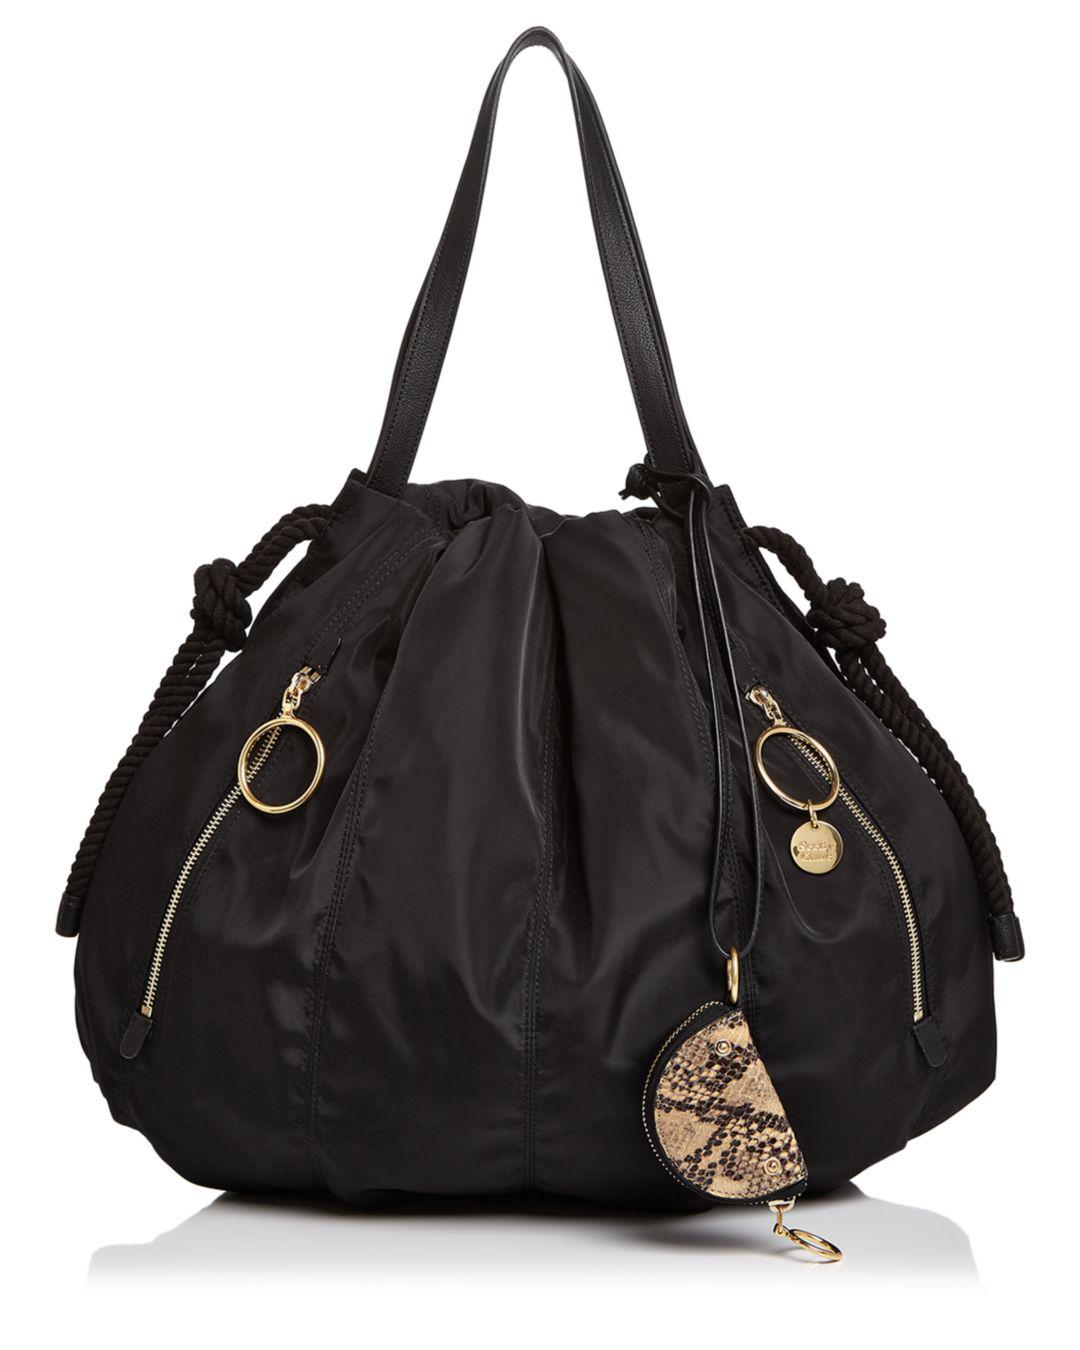 See By Chloé Synthetic Flo Large Nylon Tote in Black/Gold (Black) - Lyst